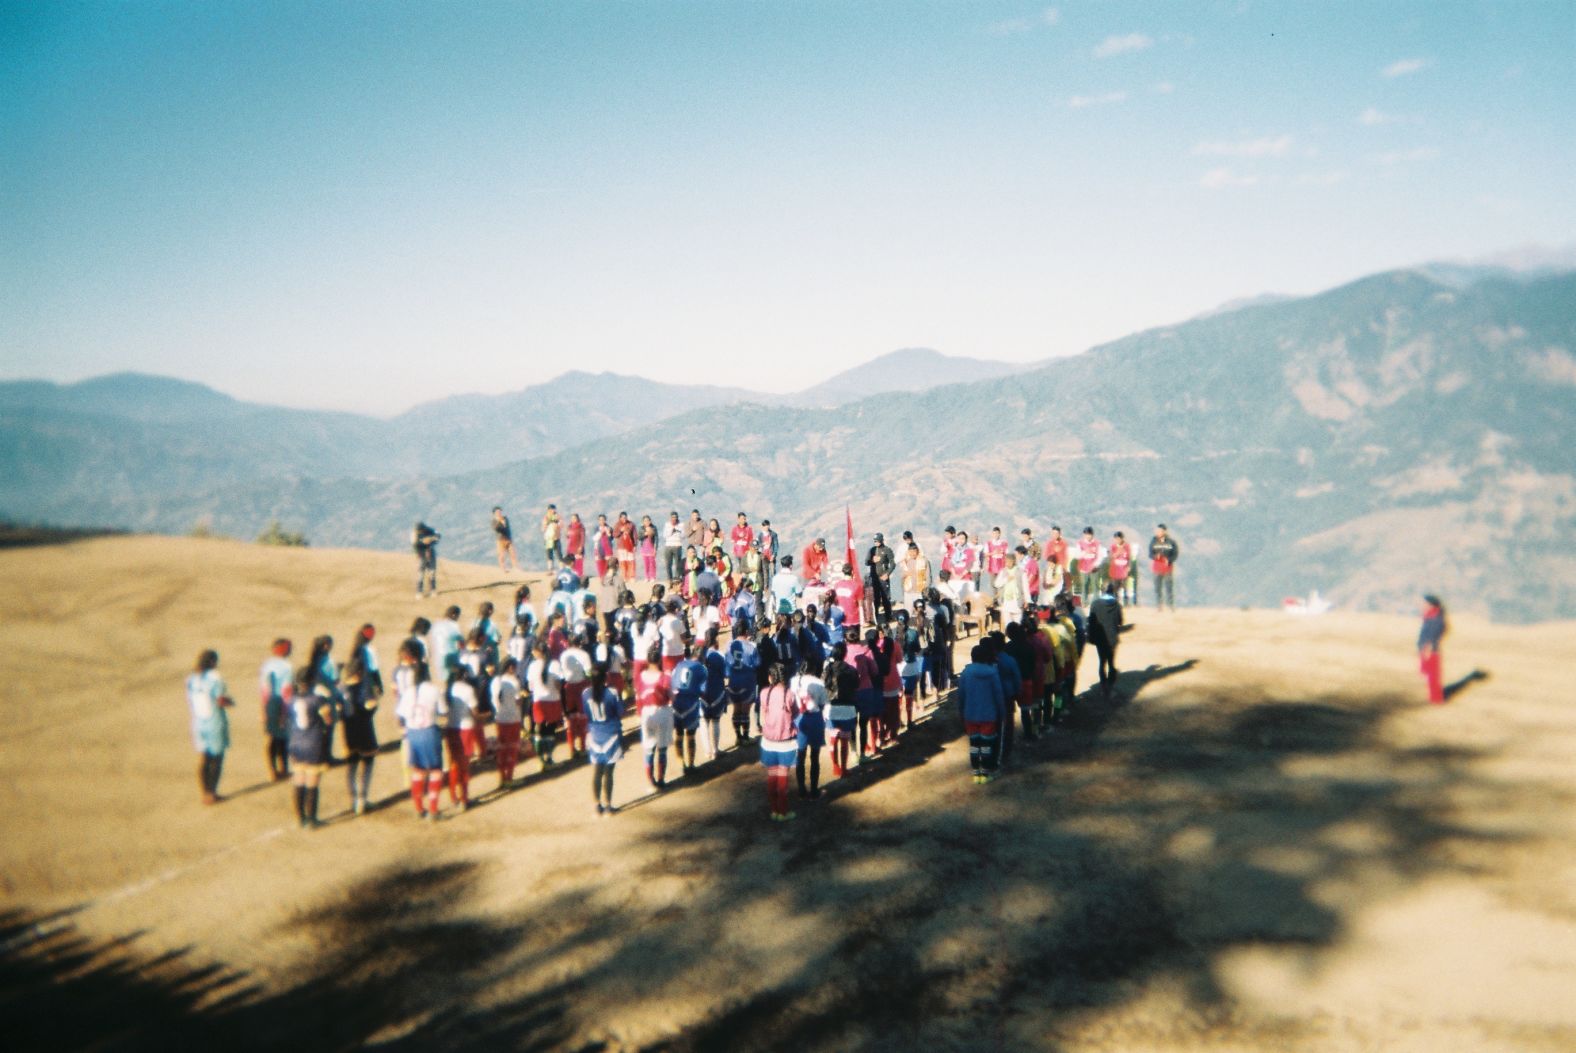 Mingma, who is a project leader for The Huracan Foundation, is also starting a not-for-profit organization, FootleadNepal, which will send project leaders into schools to encourage extra-curricular activities. "Through football we're going to be teaching leadership, teamwork and communication so we can bring small changes in communities like this," he says. 